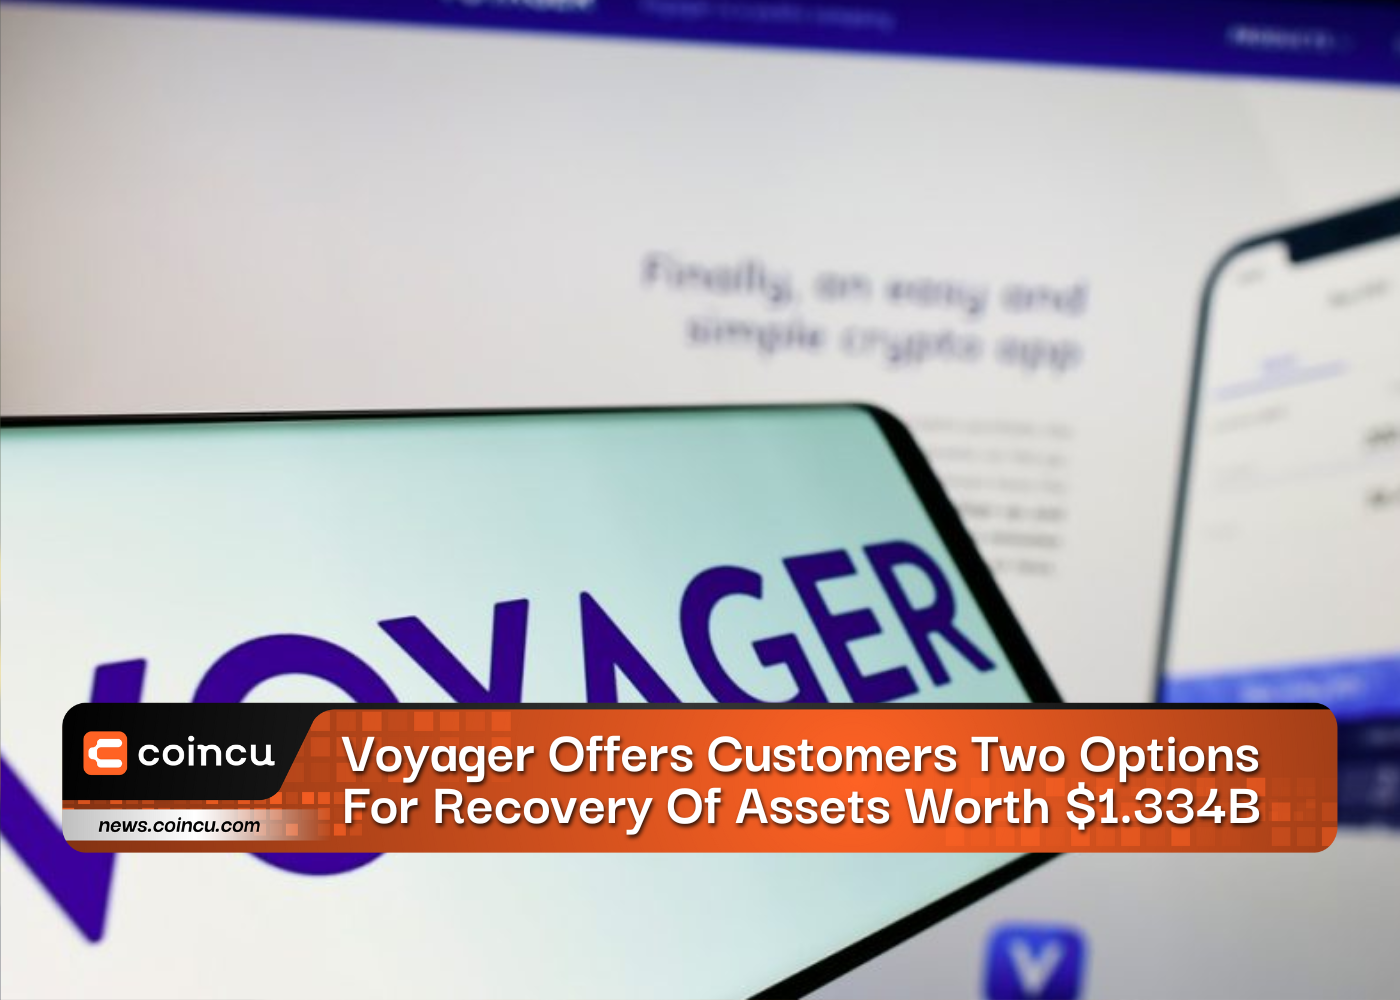 Voyager Offers Customers Two Options For Recovery Of Assets Worth $1.334B